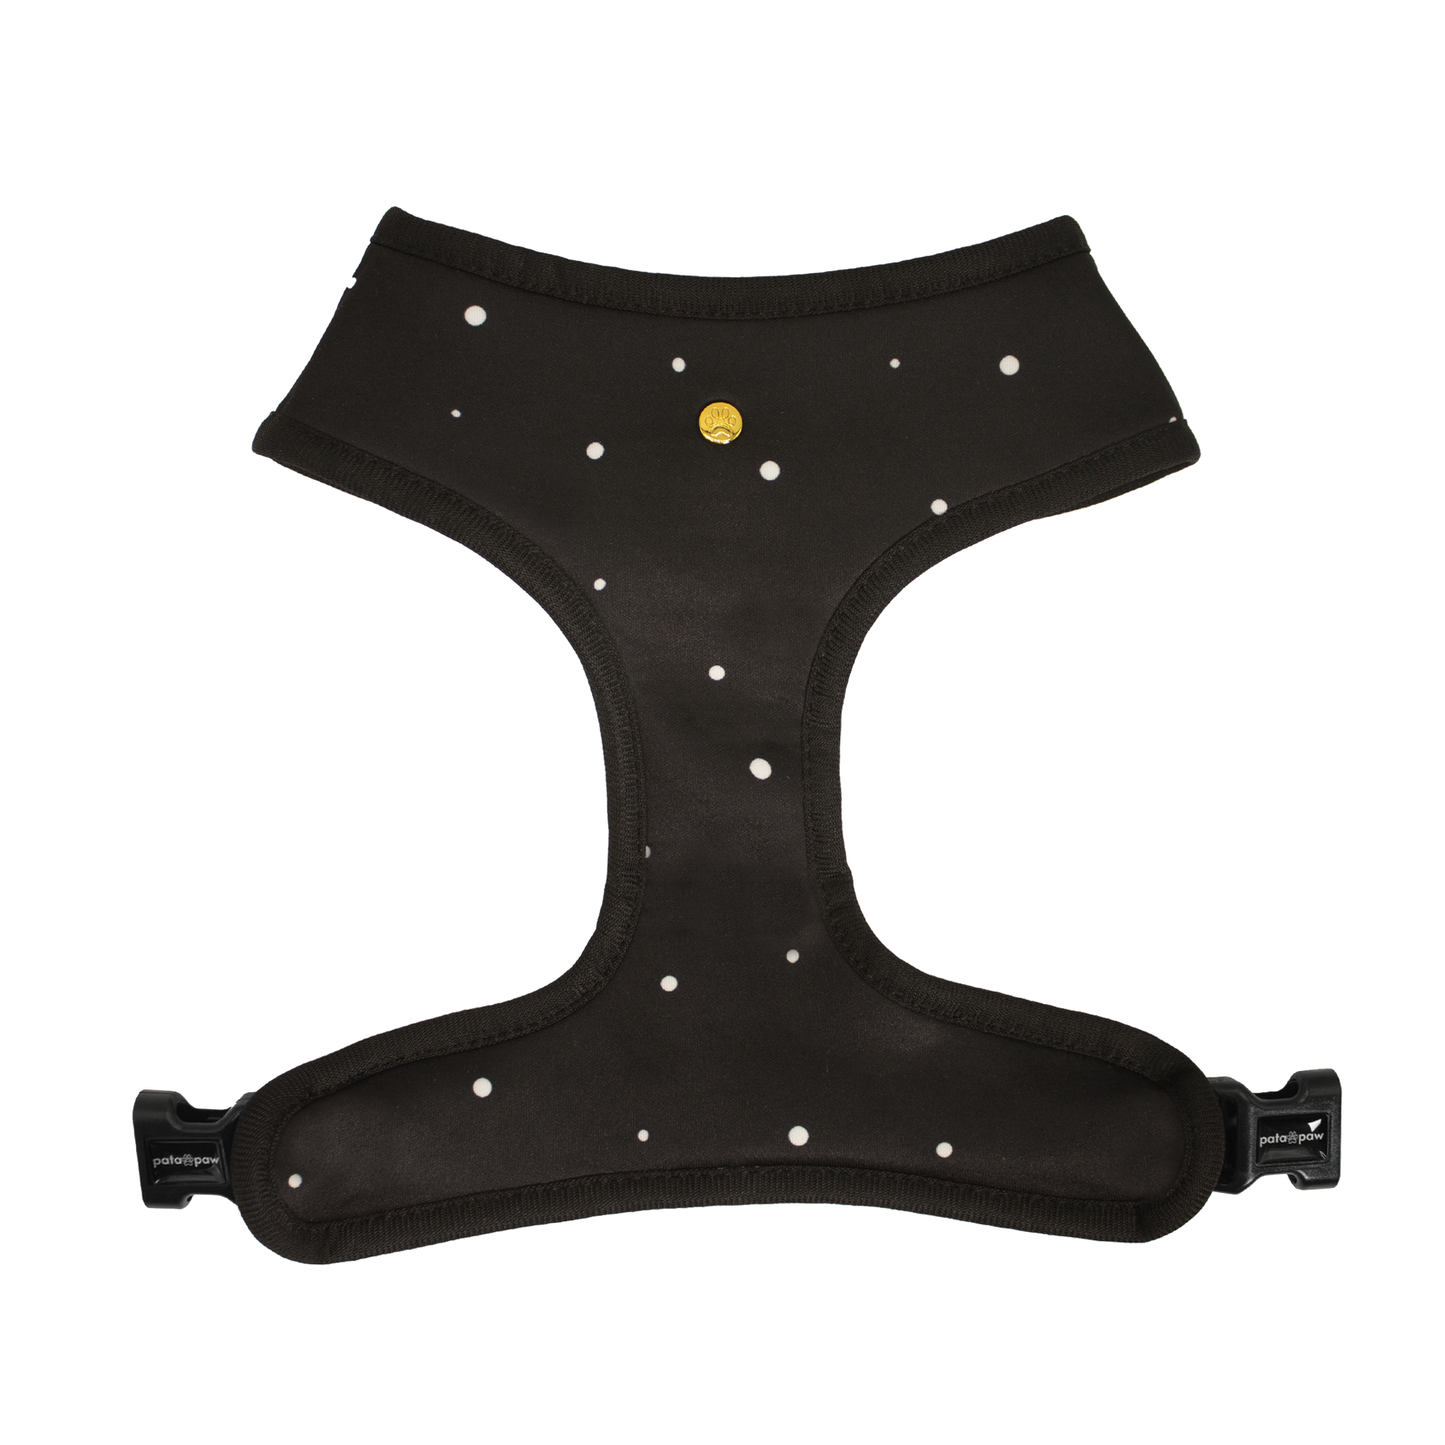 Pata Paw moo reversible harness showing a timeless and chic design of hand-painted dots on a black background.